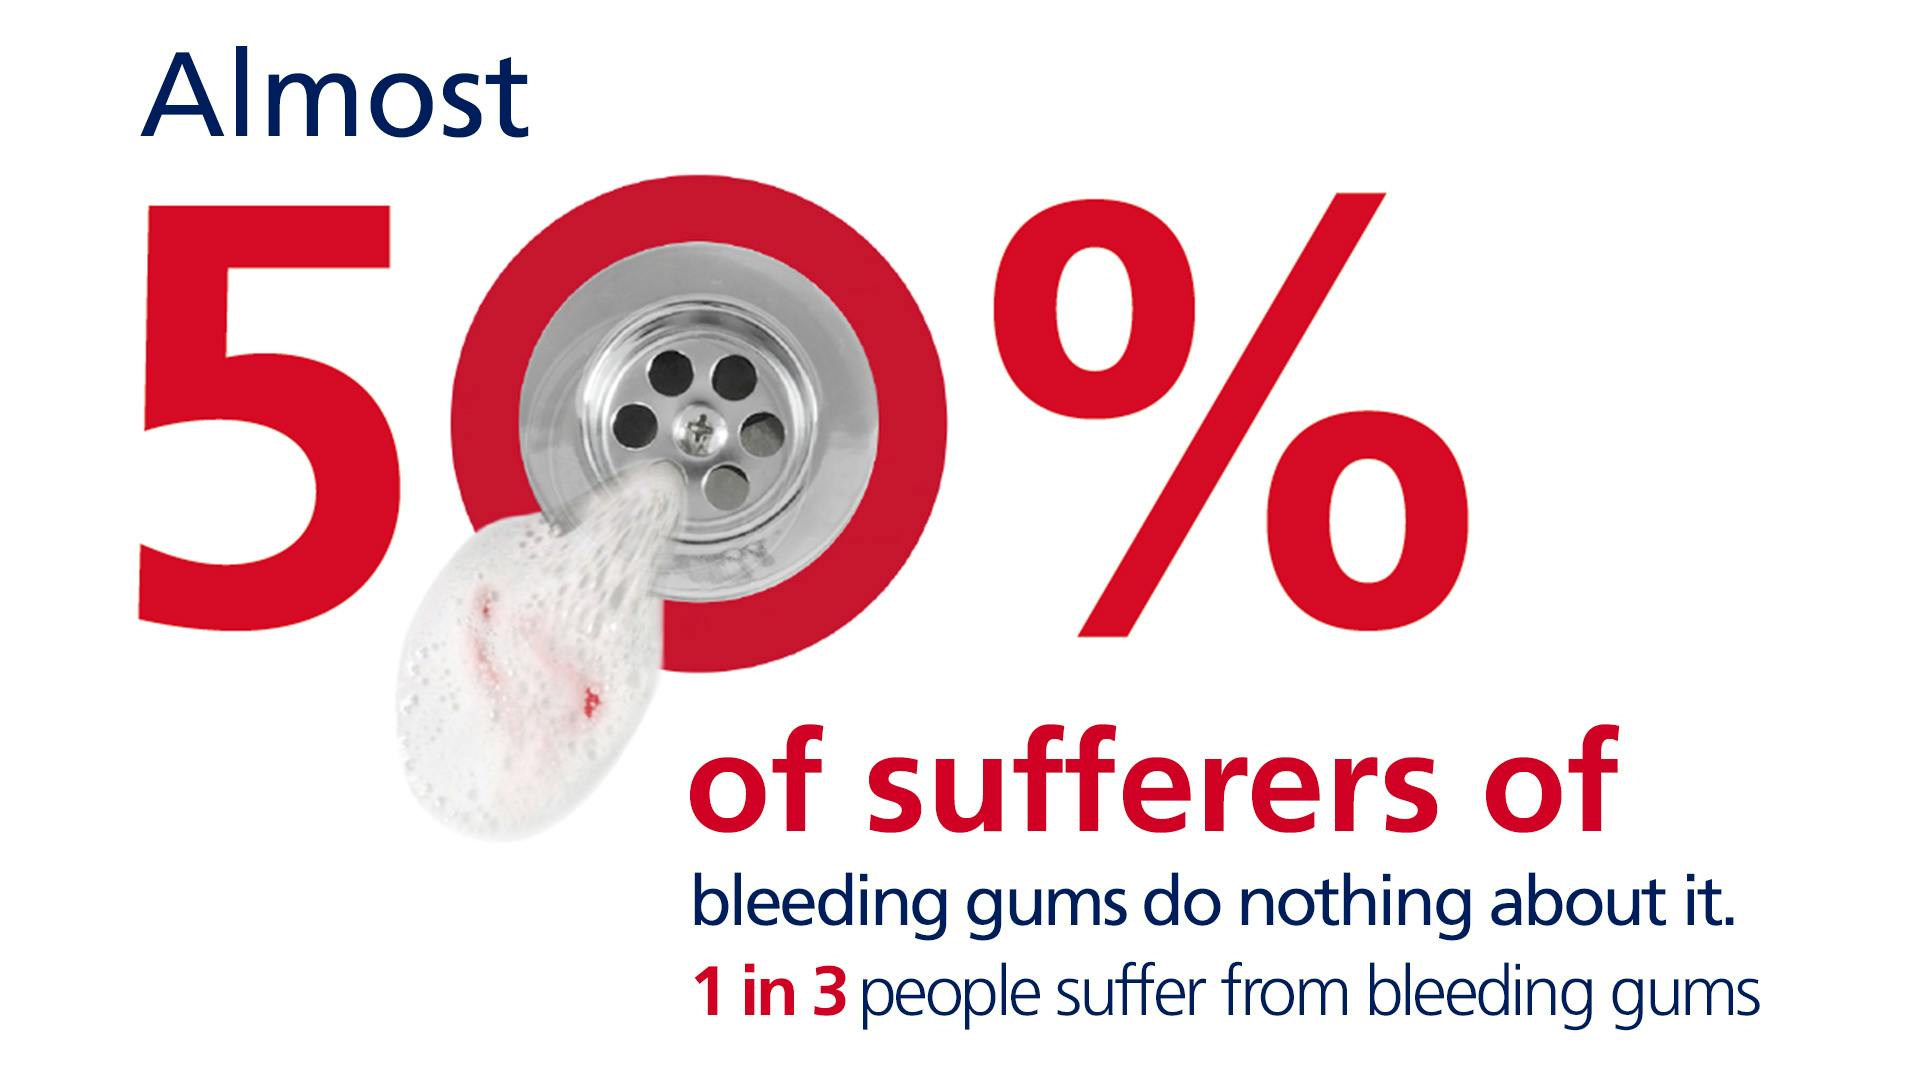 Almost 50% of sufferers of bleeding gums do nothing about it. 1 in 3 people suffer with bleeding gums.